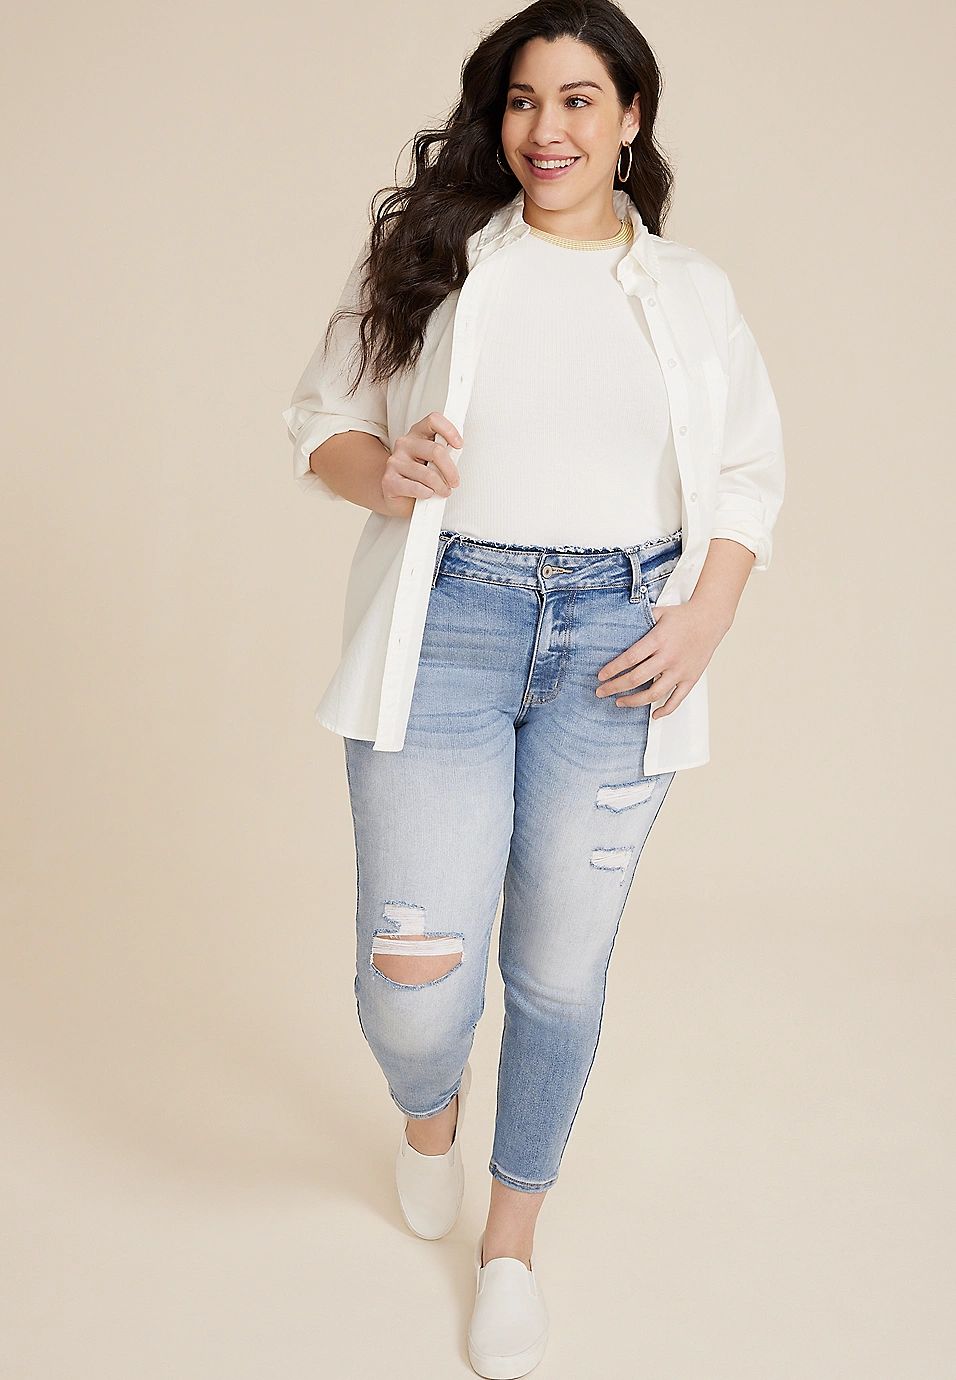 Plus Size KanCan™ High Rise Frayed Waist Skinny Jean | Maurices